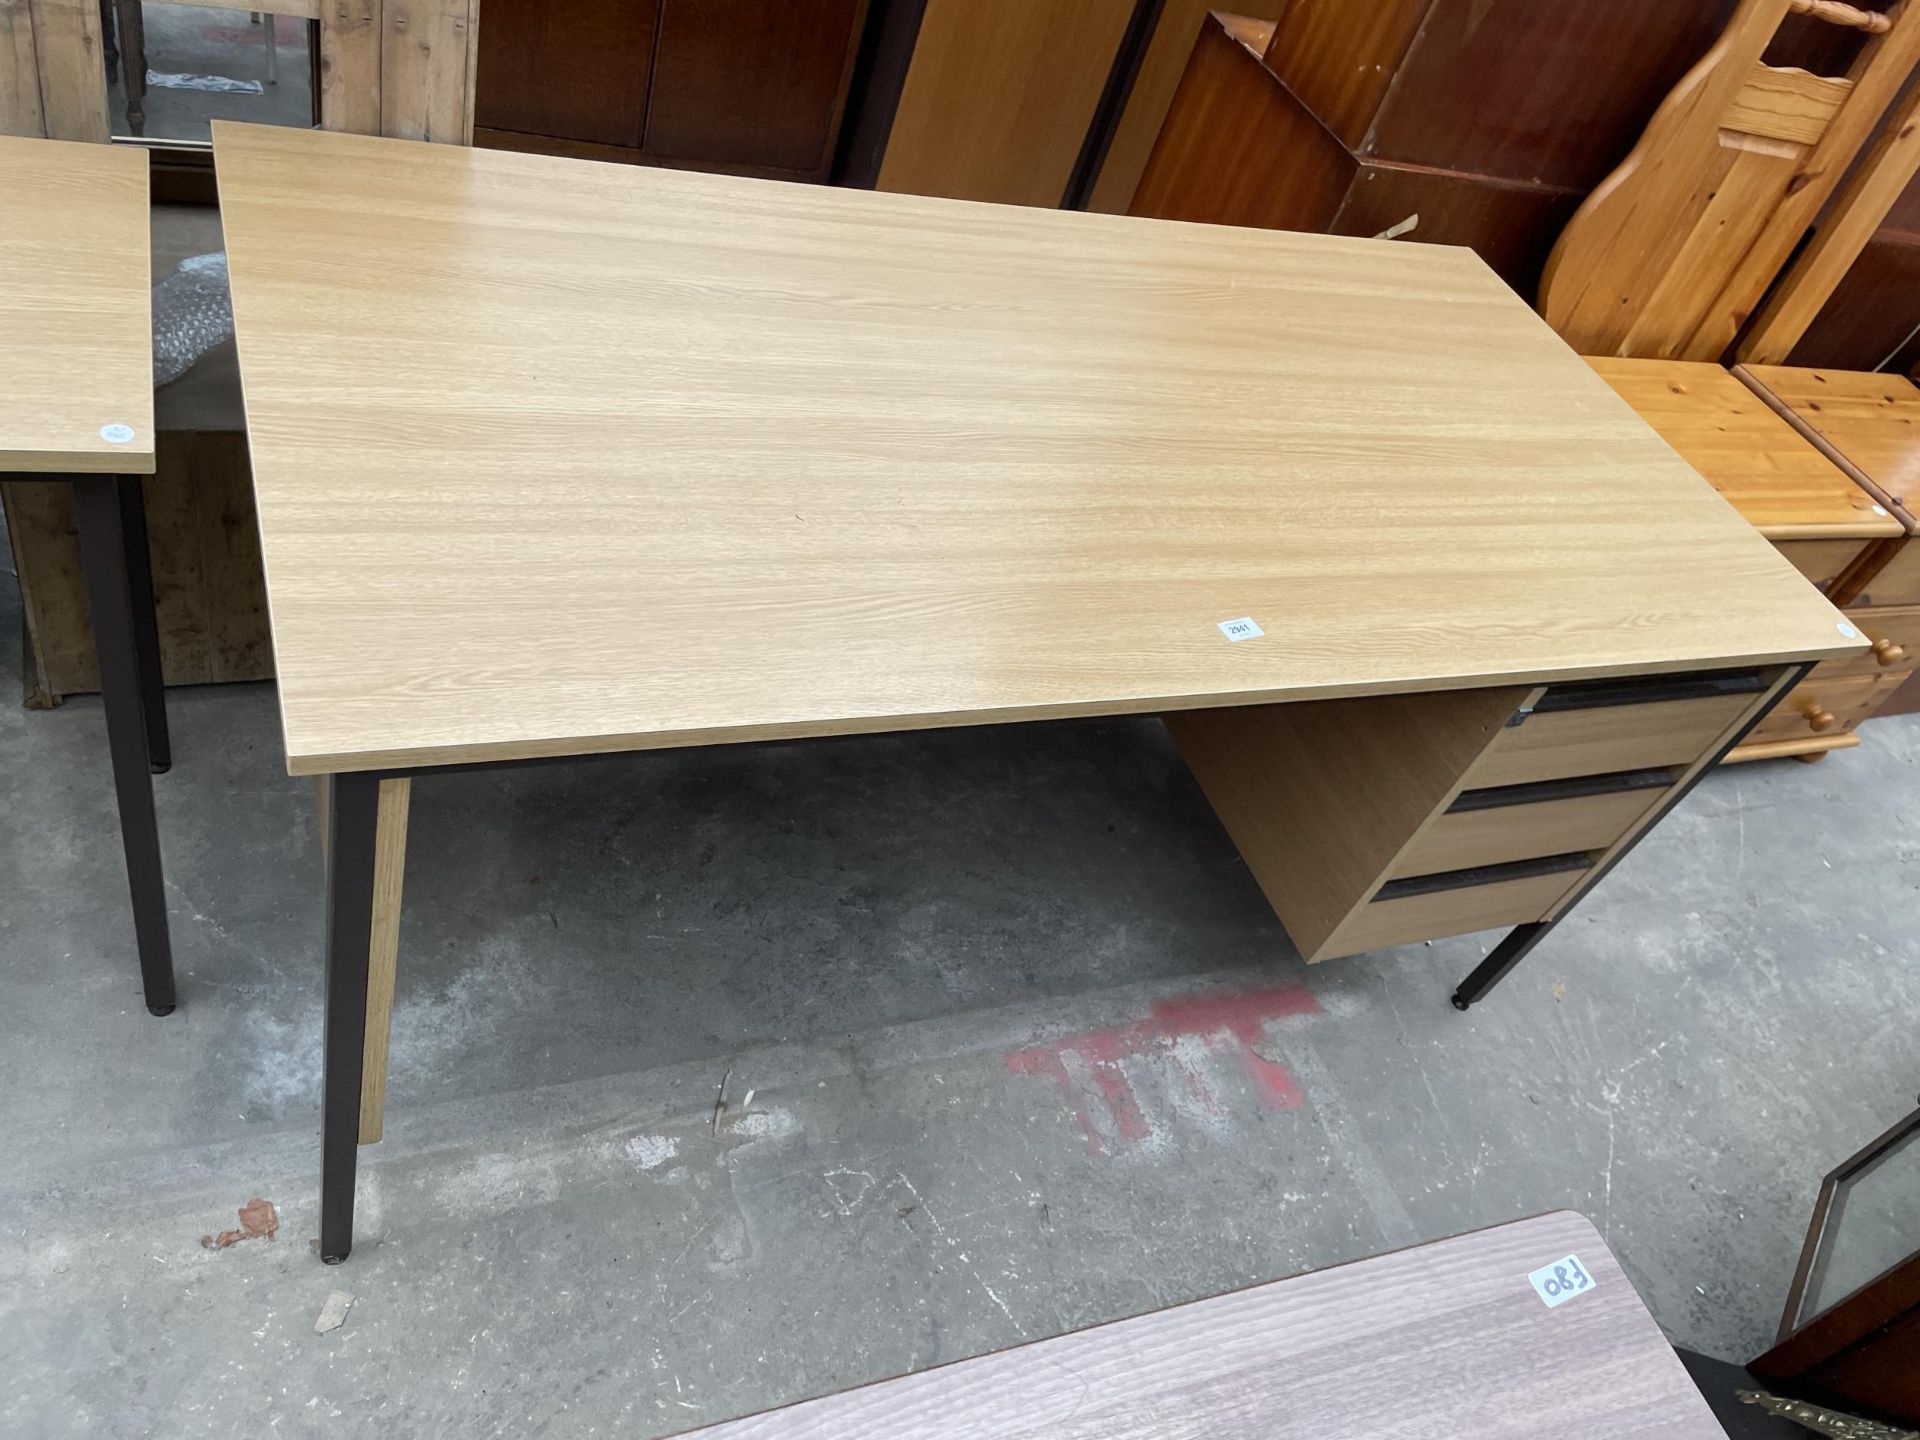 A SINGLE PEDESTAL DESK 59" X 29" AND MATCHING TABLE - Image 2 of 4